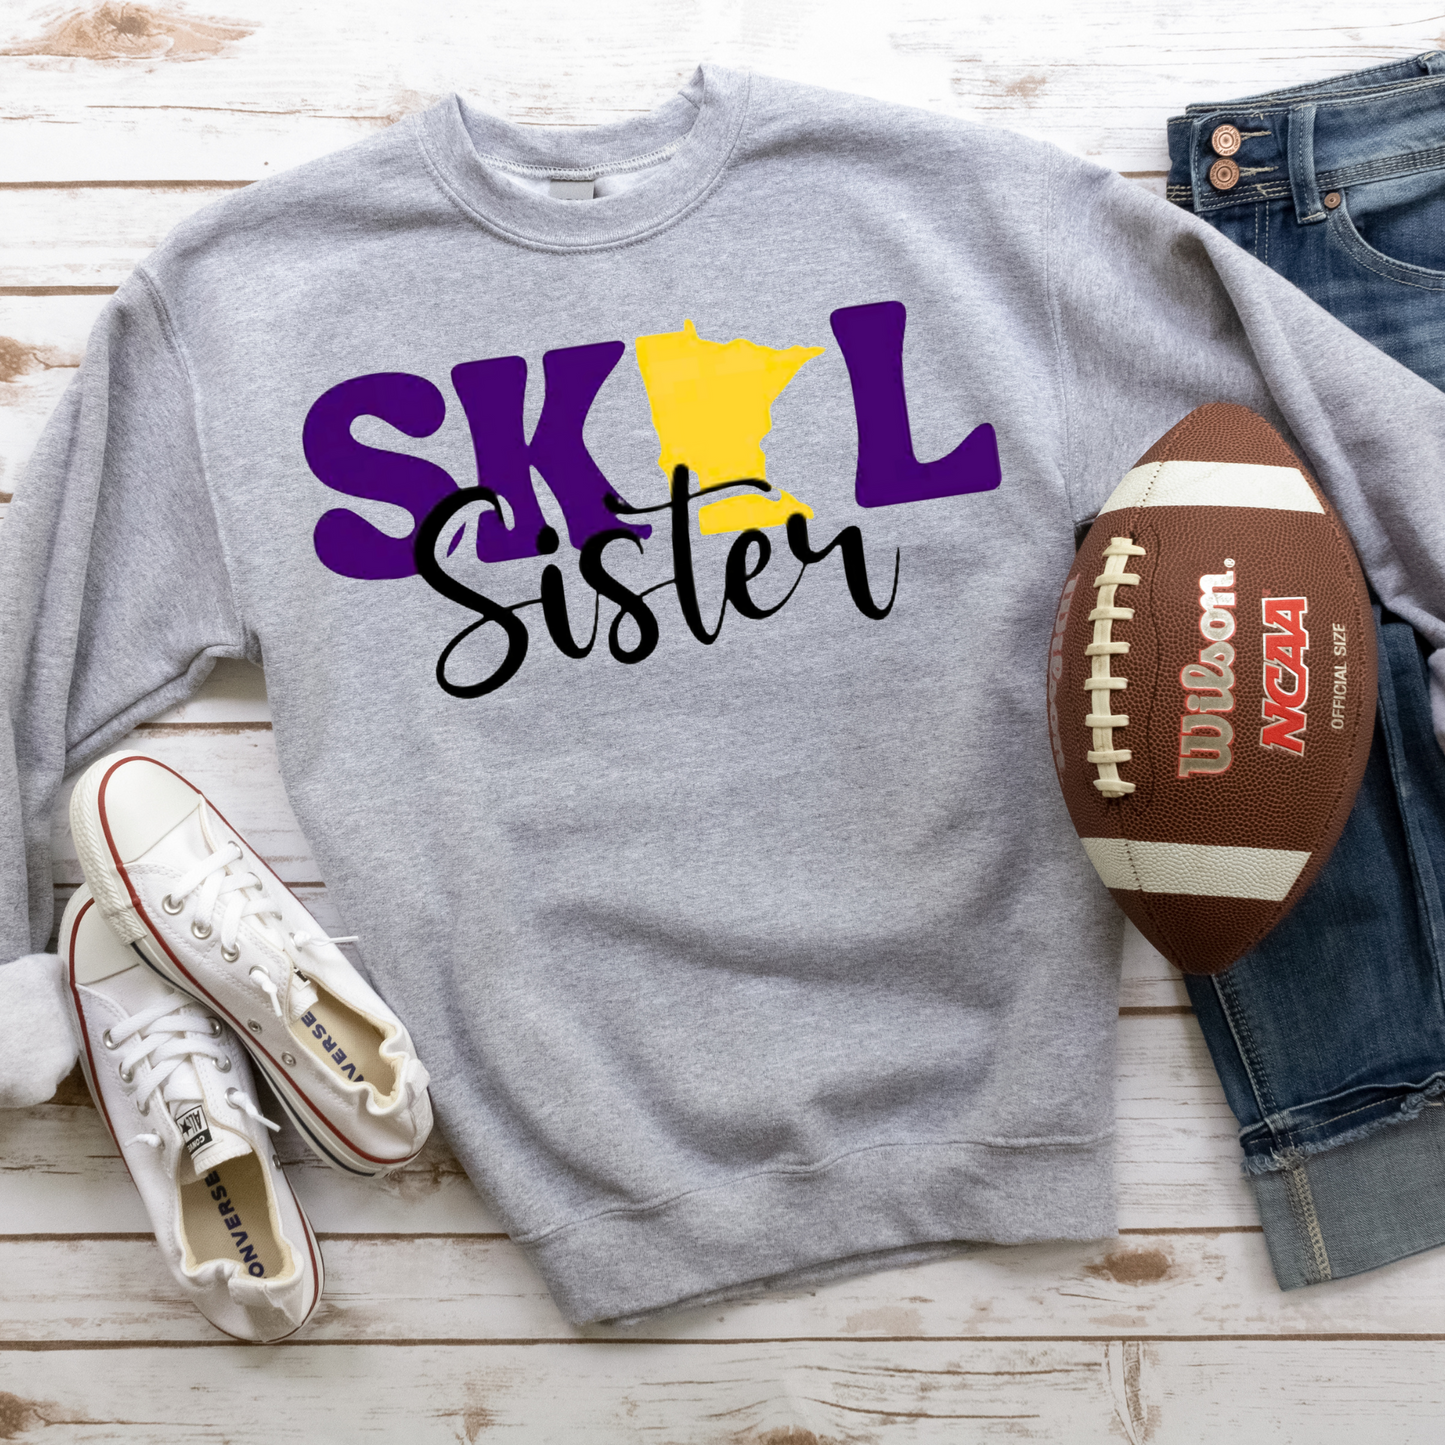 SKOL SISTER T-SHIRT - OR -  200 COLOR & STYLE OPTIONS! - TAT 4-7 DAYS